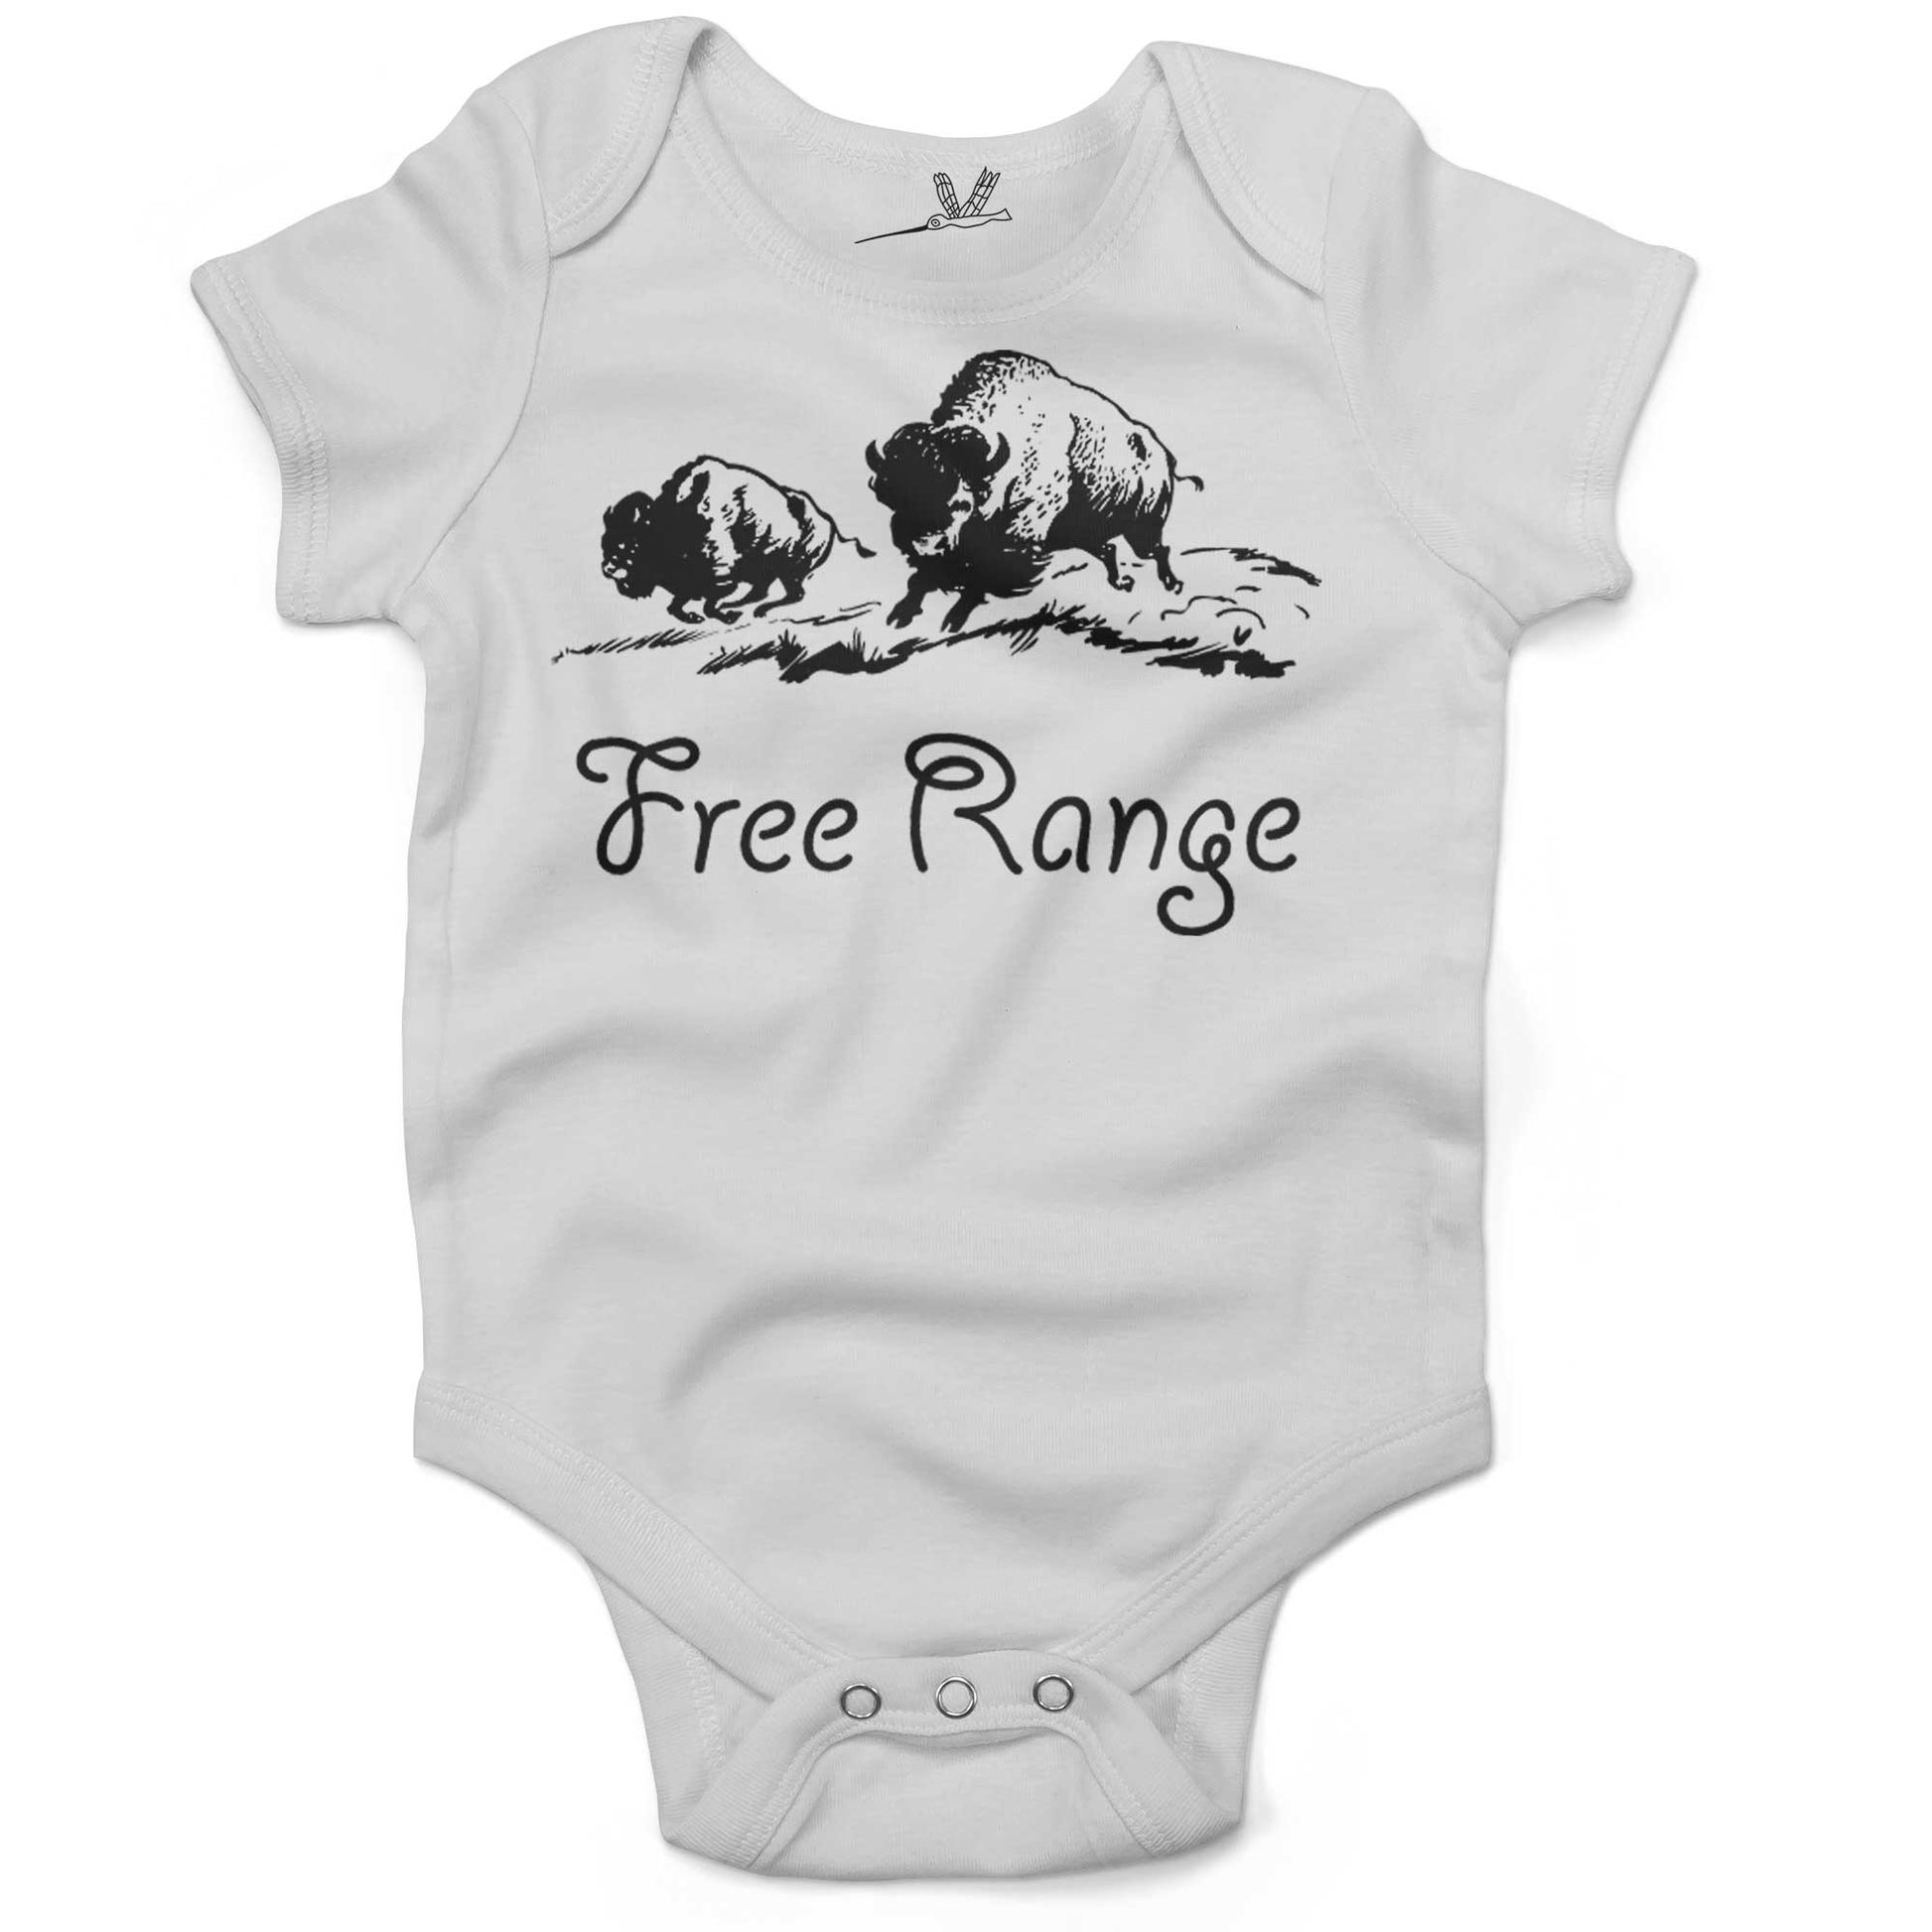 Where The Buffalo Roam Baby One Piece-White-3-6 months